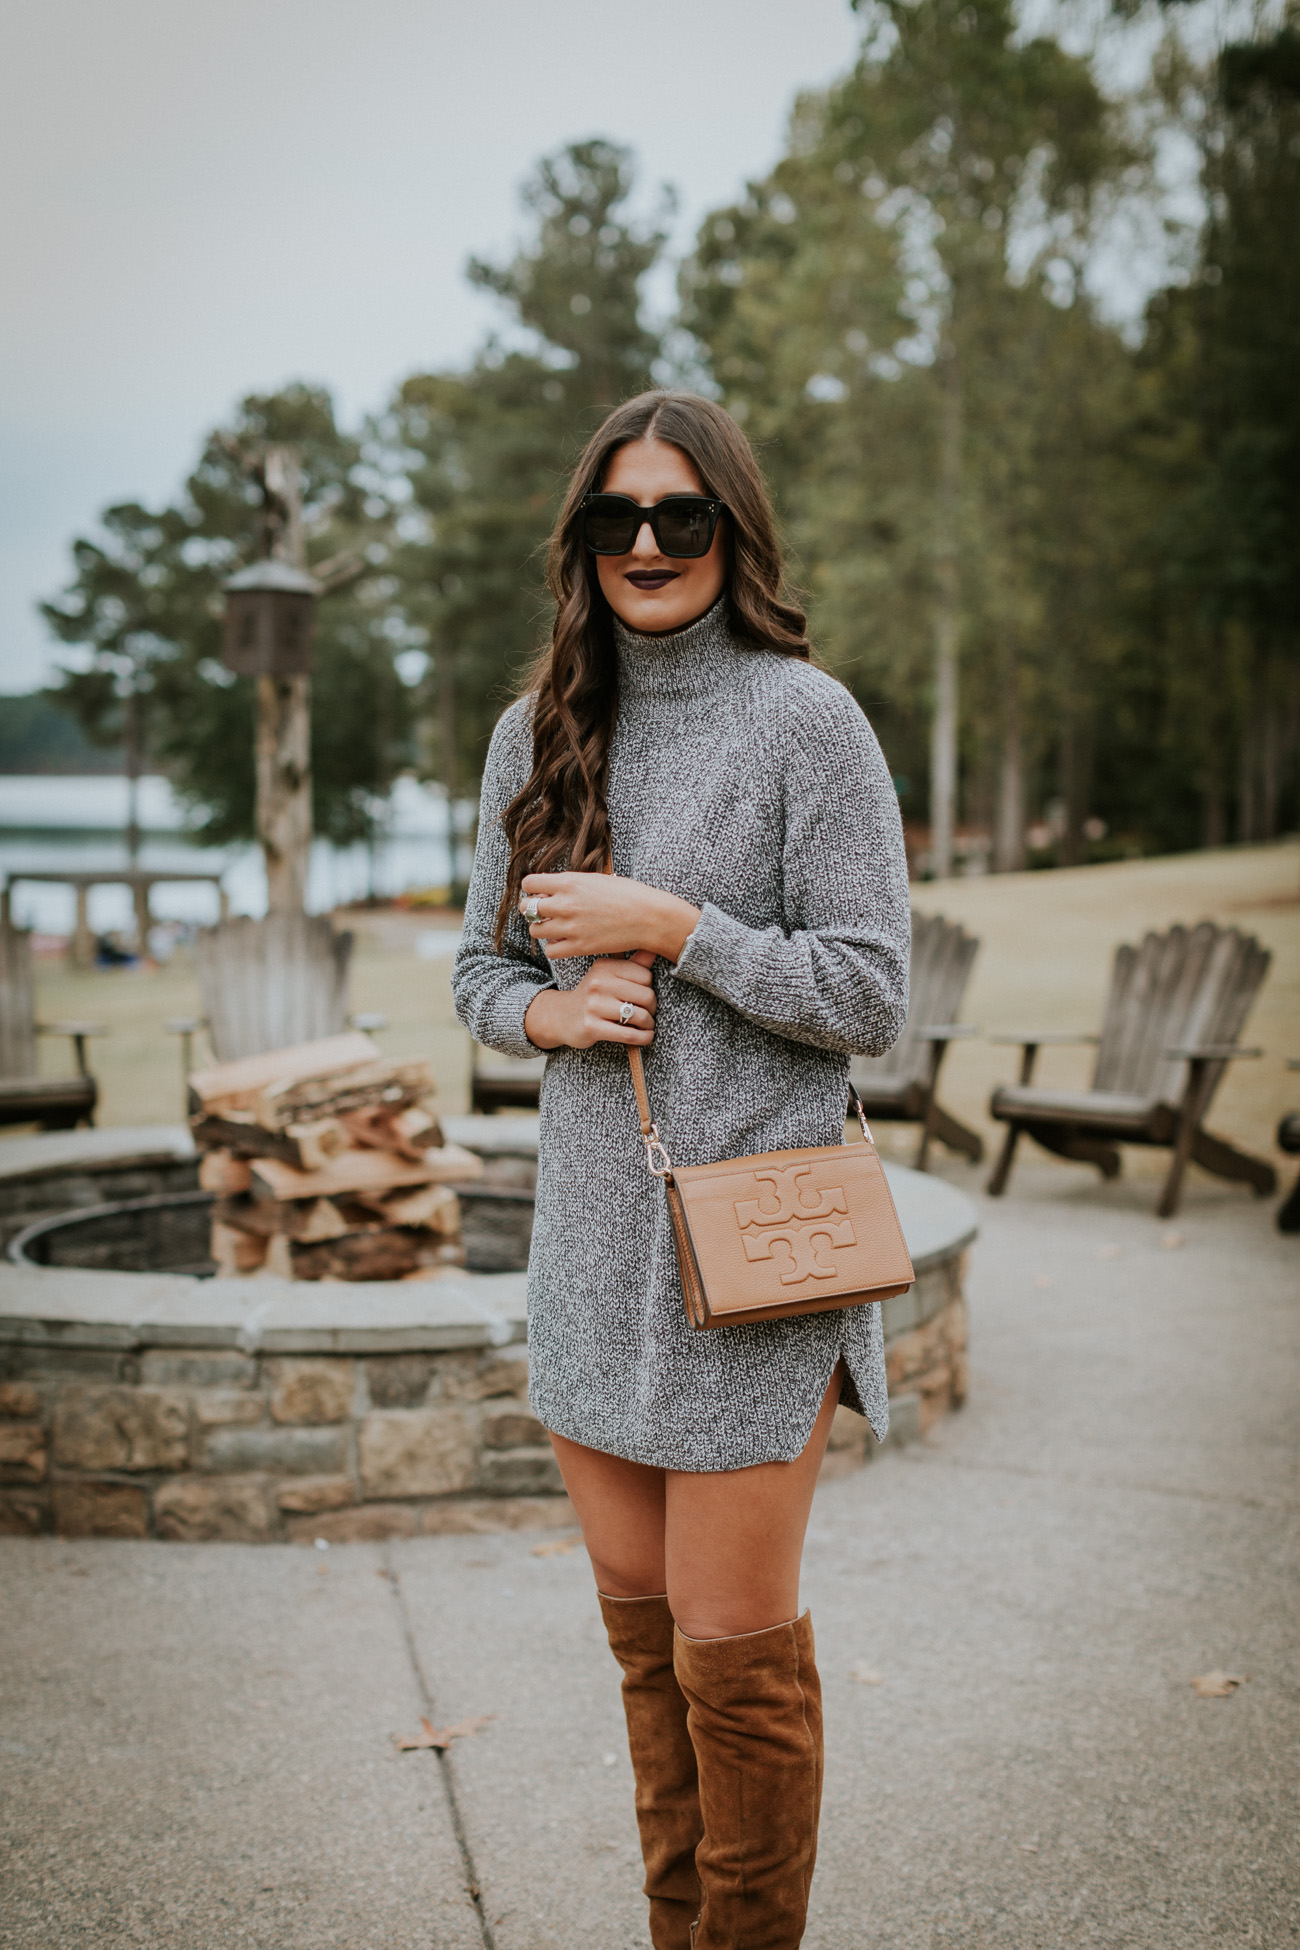 funnel neck sweater dress, over the knee boots, cognac over the knee boots, dolce vita over the knee boots, vince camuto over the knee boots, tory burch crossbody bag, winter lipsticks, fall lipsticks, celine sunglasses, winter style, cute winter outfit, casual winter outfit // grace wainwright a southern drawl